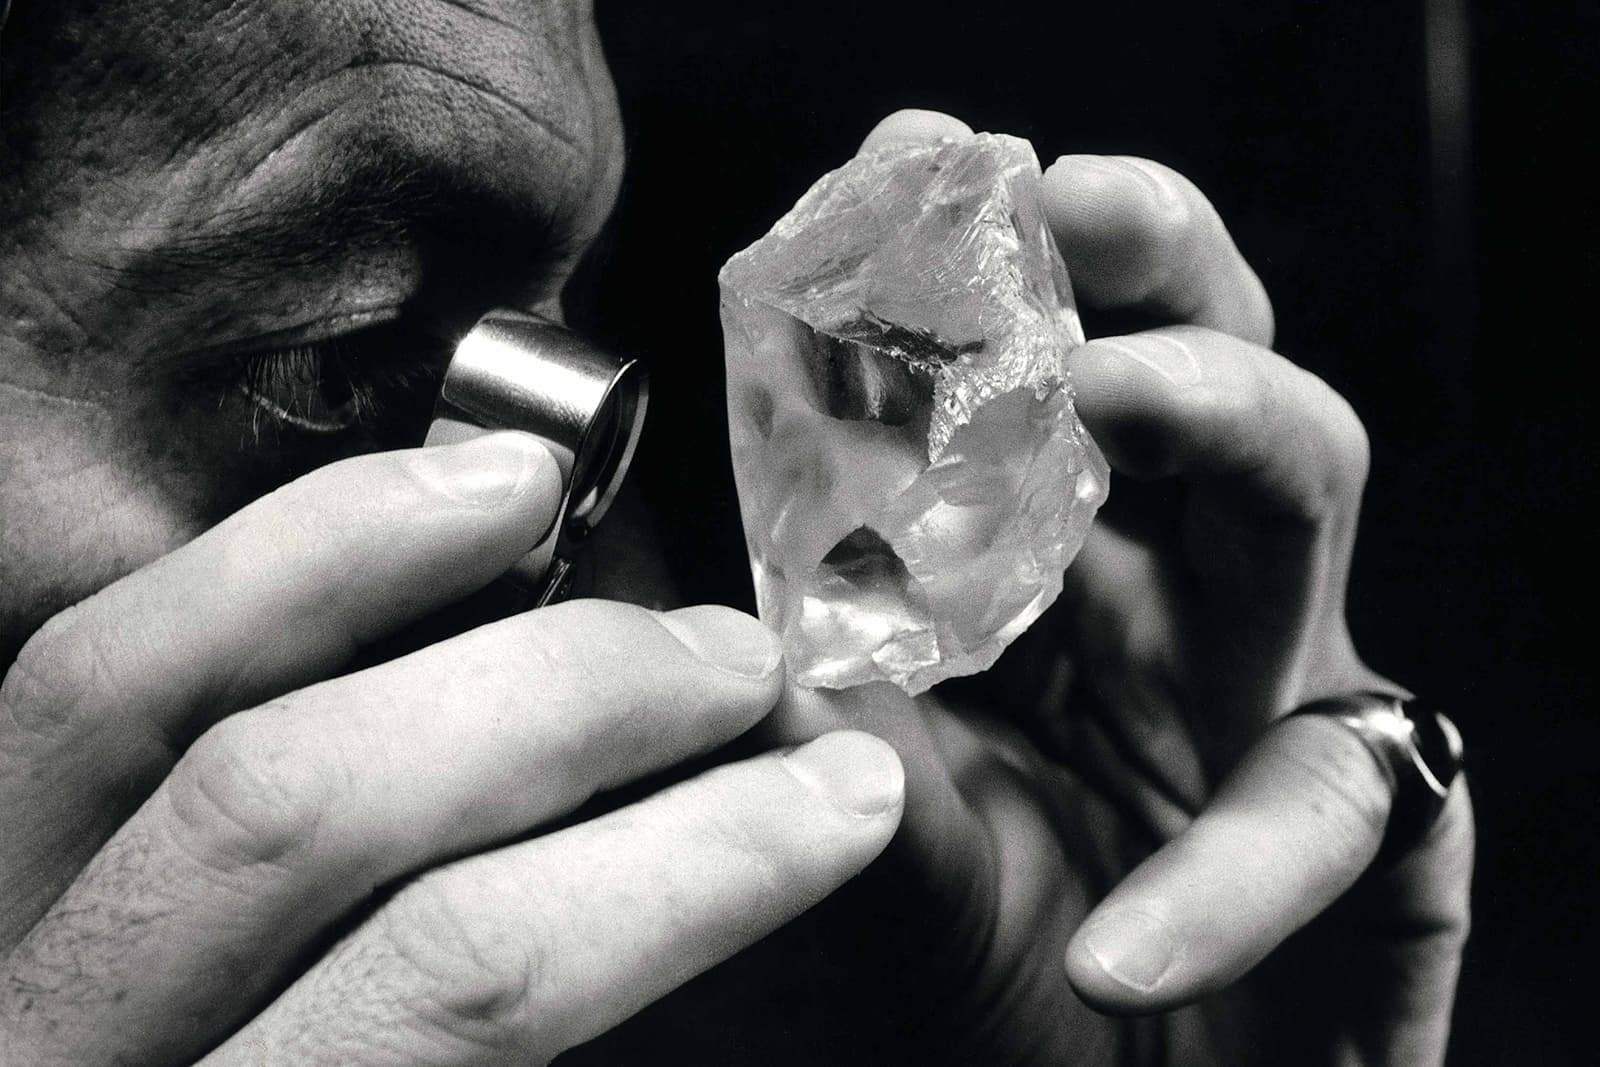 A gemmologist uses a loupe to examine the 603-carat Lesotho Promise rough diamond